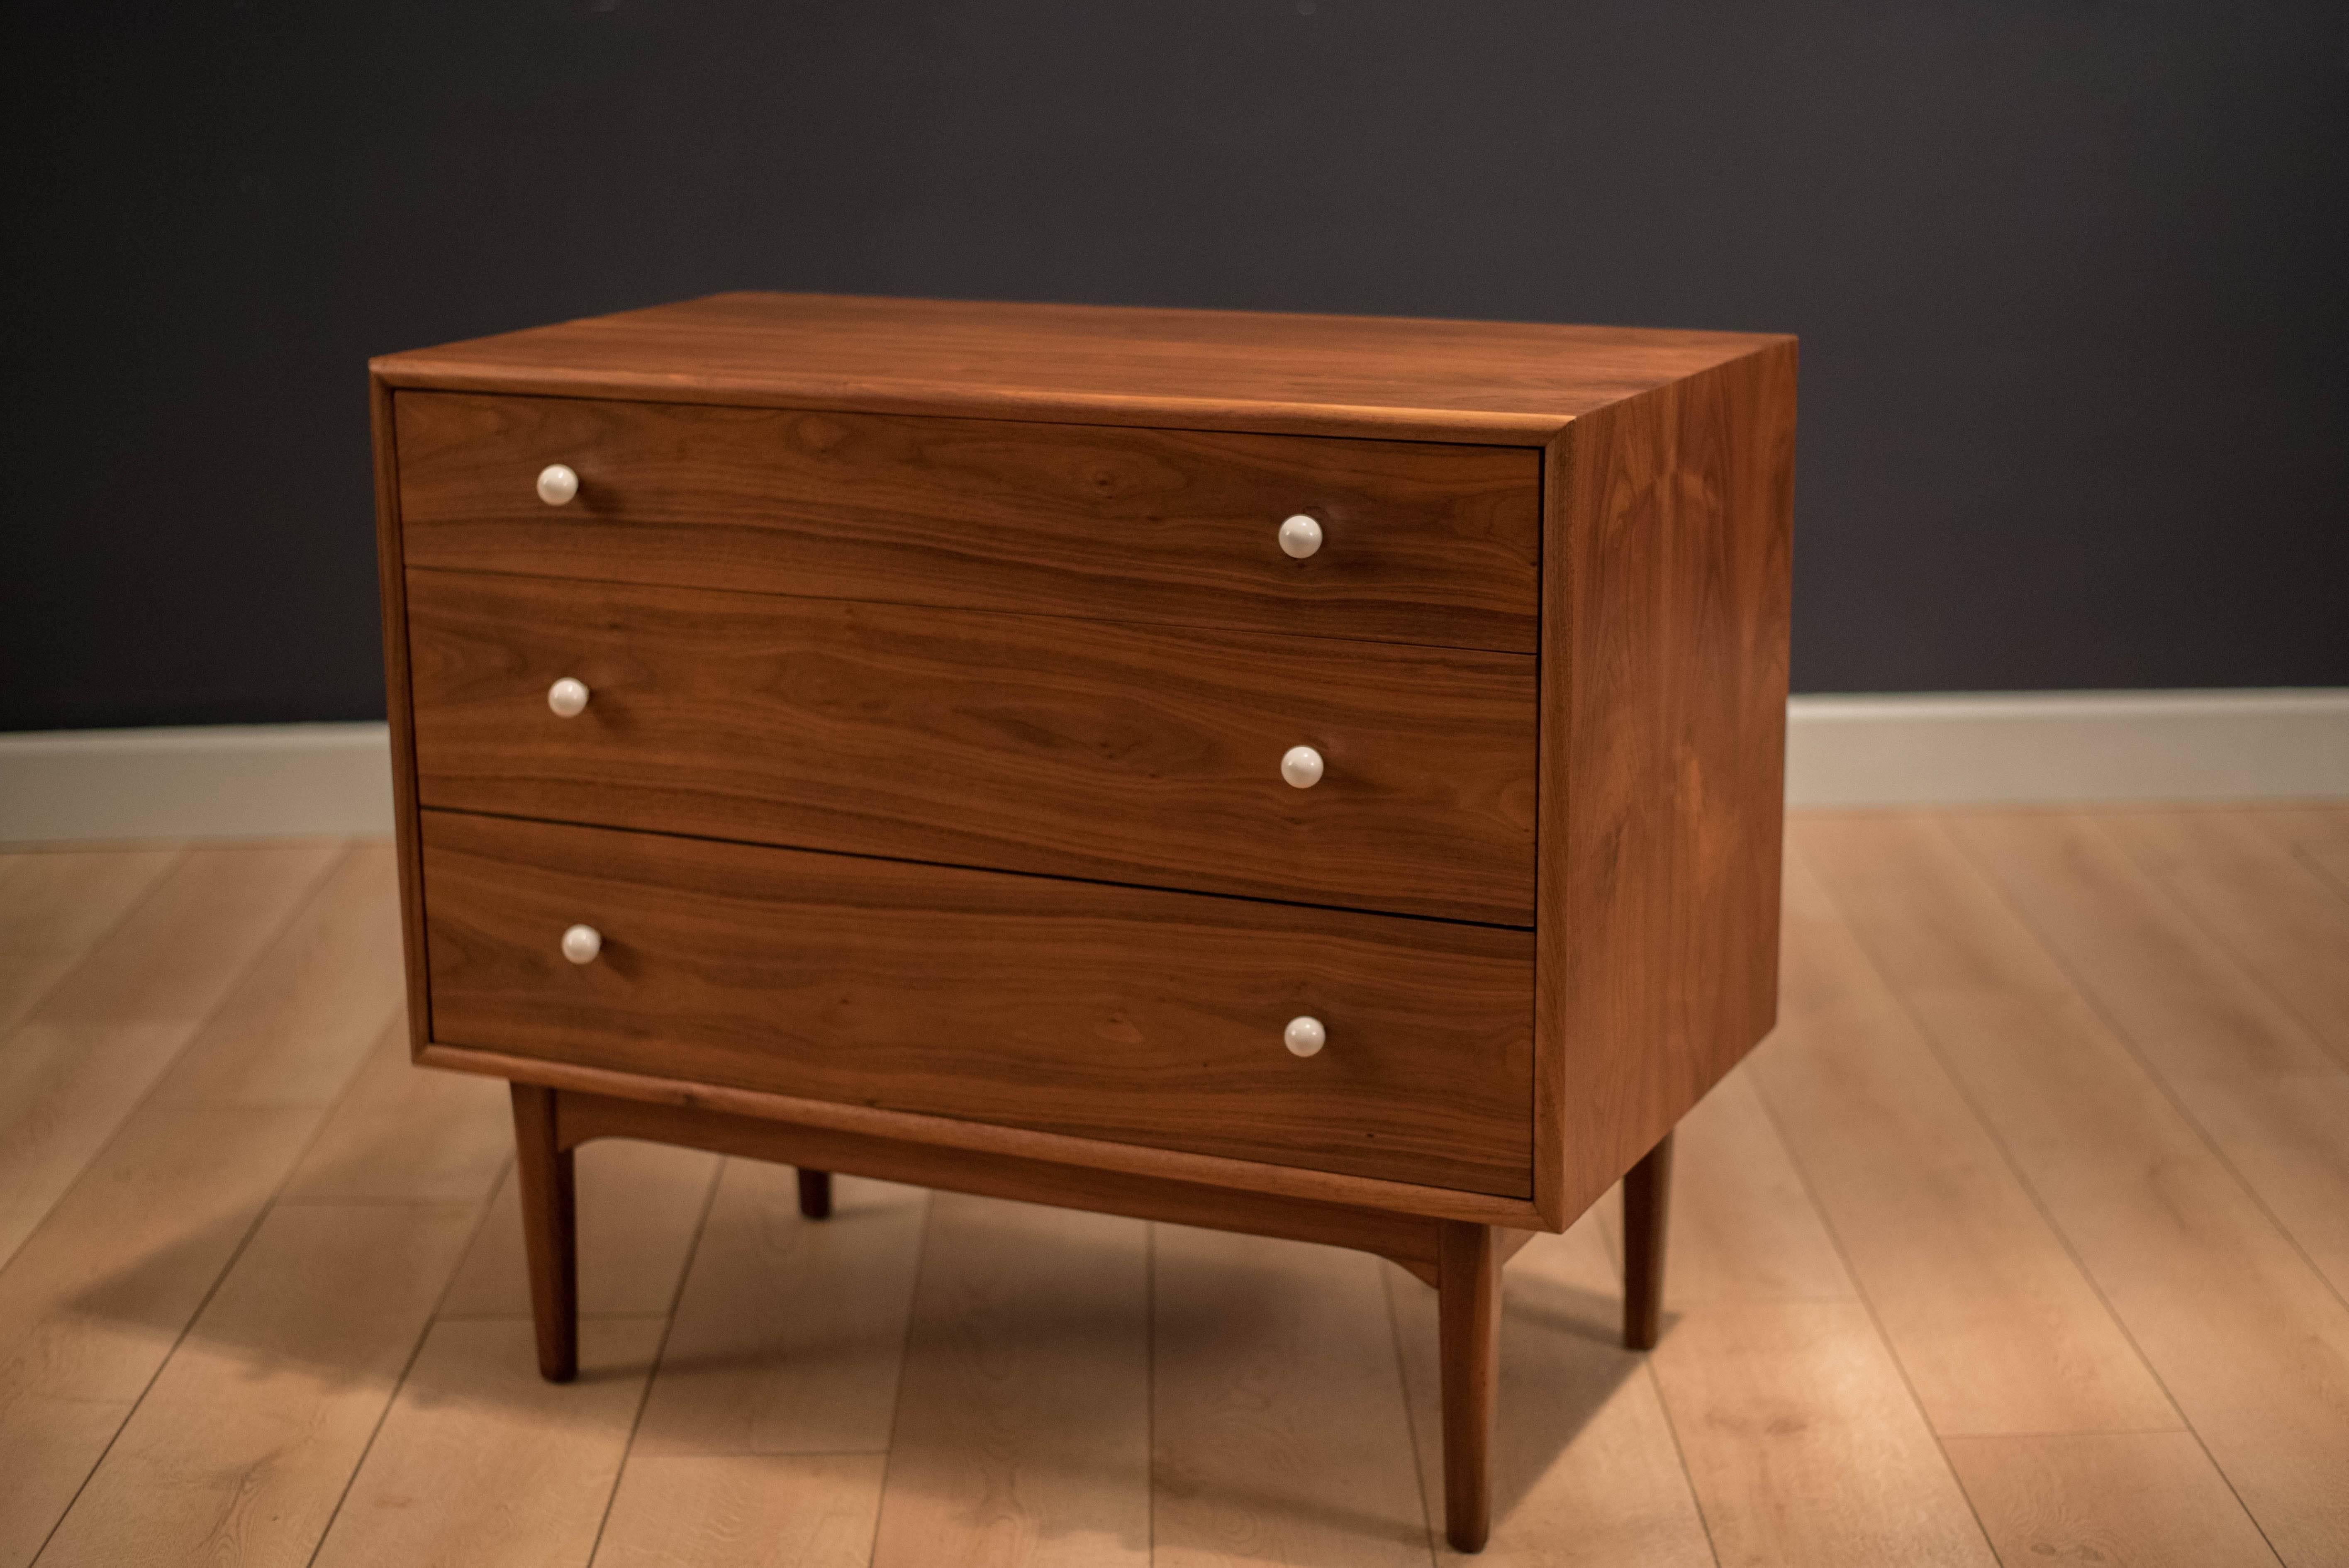 Mid-Century Drexel declaration chest by Kipp Stewart and Stewart McDougall. This piece is equipped with three spacious drawers accessorized with their signature white porcelain pulls. Casepiece displays bookmatched black walnut grains.

 